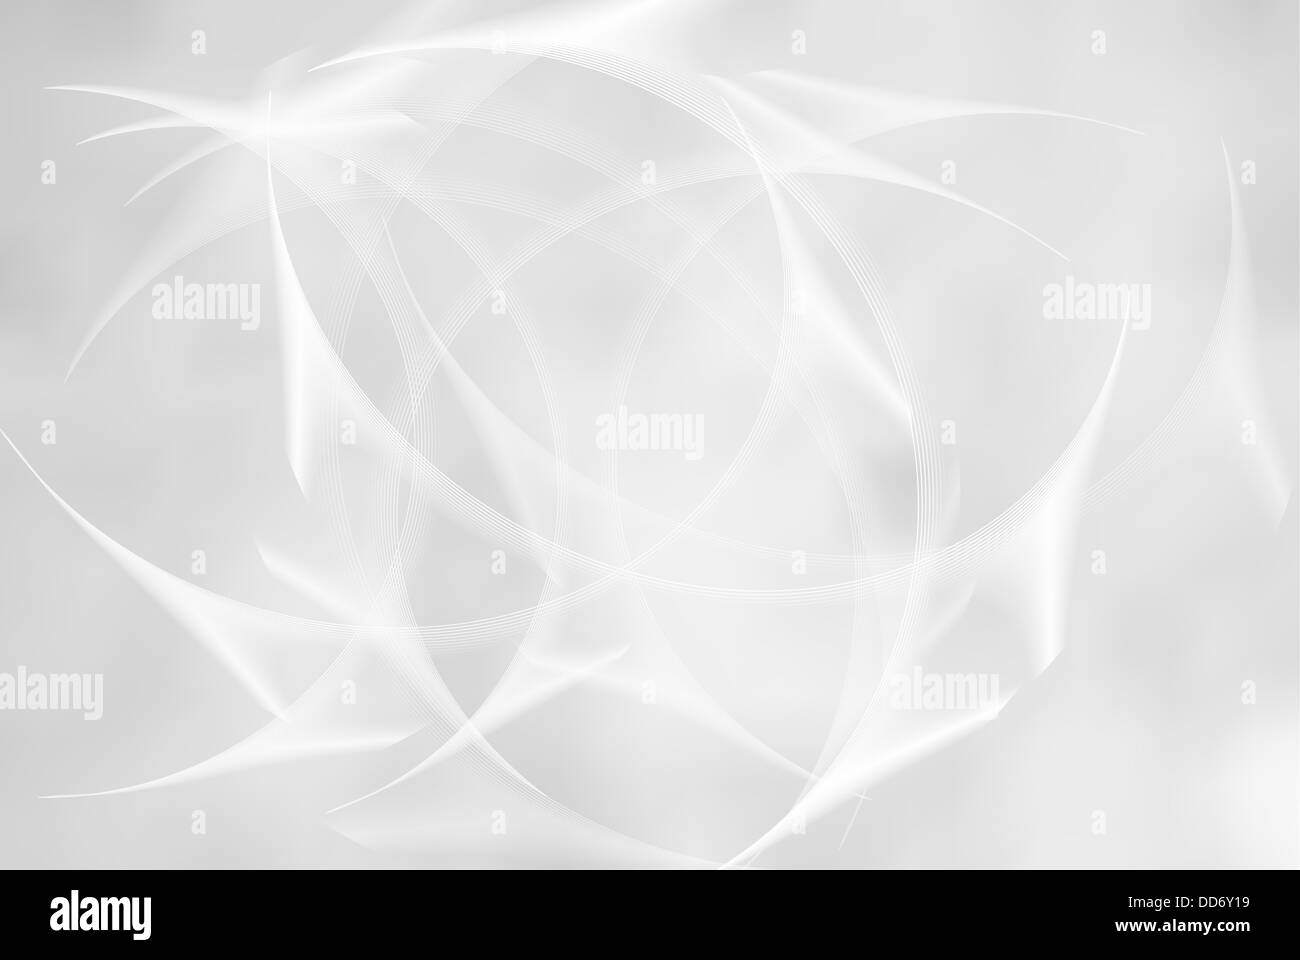 Abstract Vector Backgrounds onde dynamique Banque D'Images